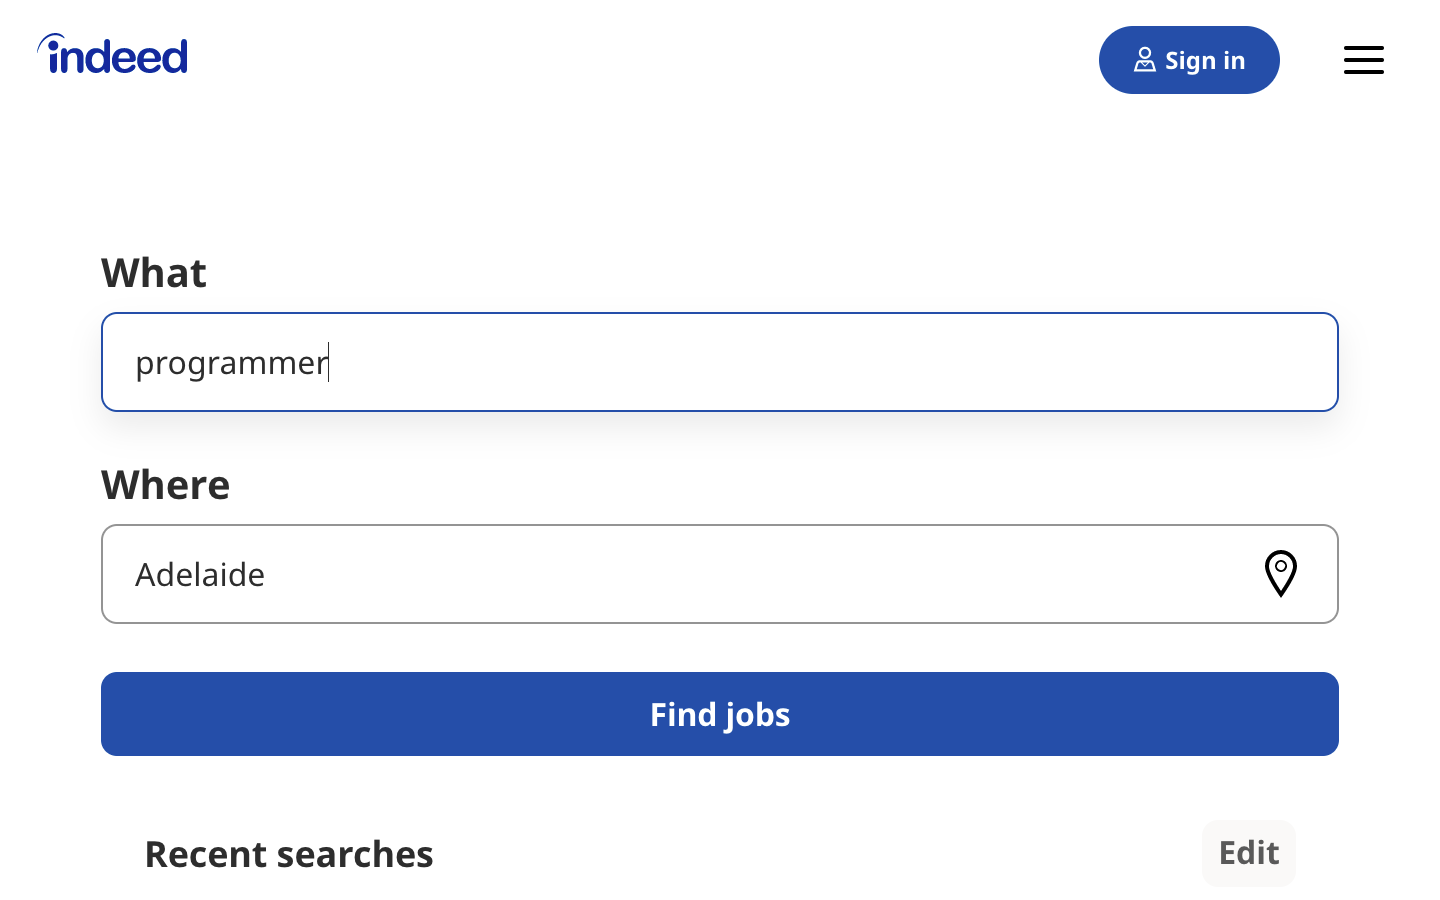 Search interface of the Indeed job board